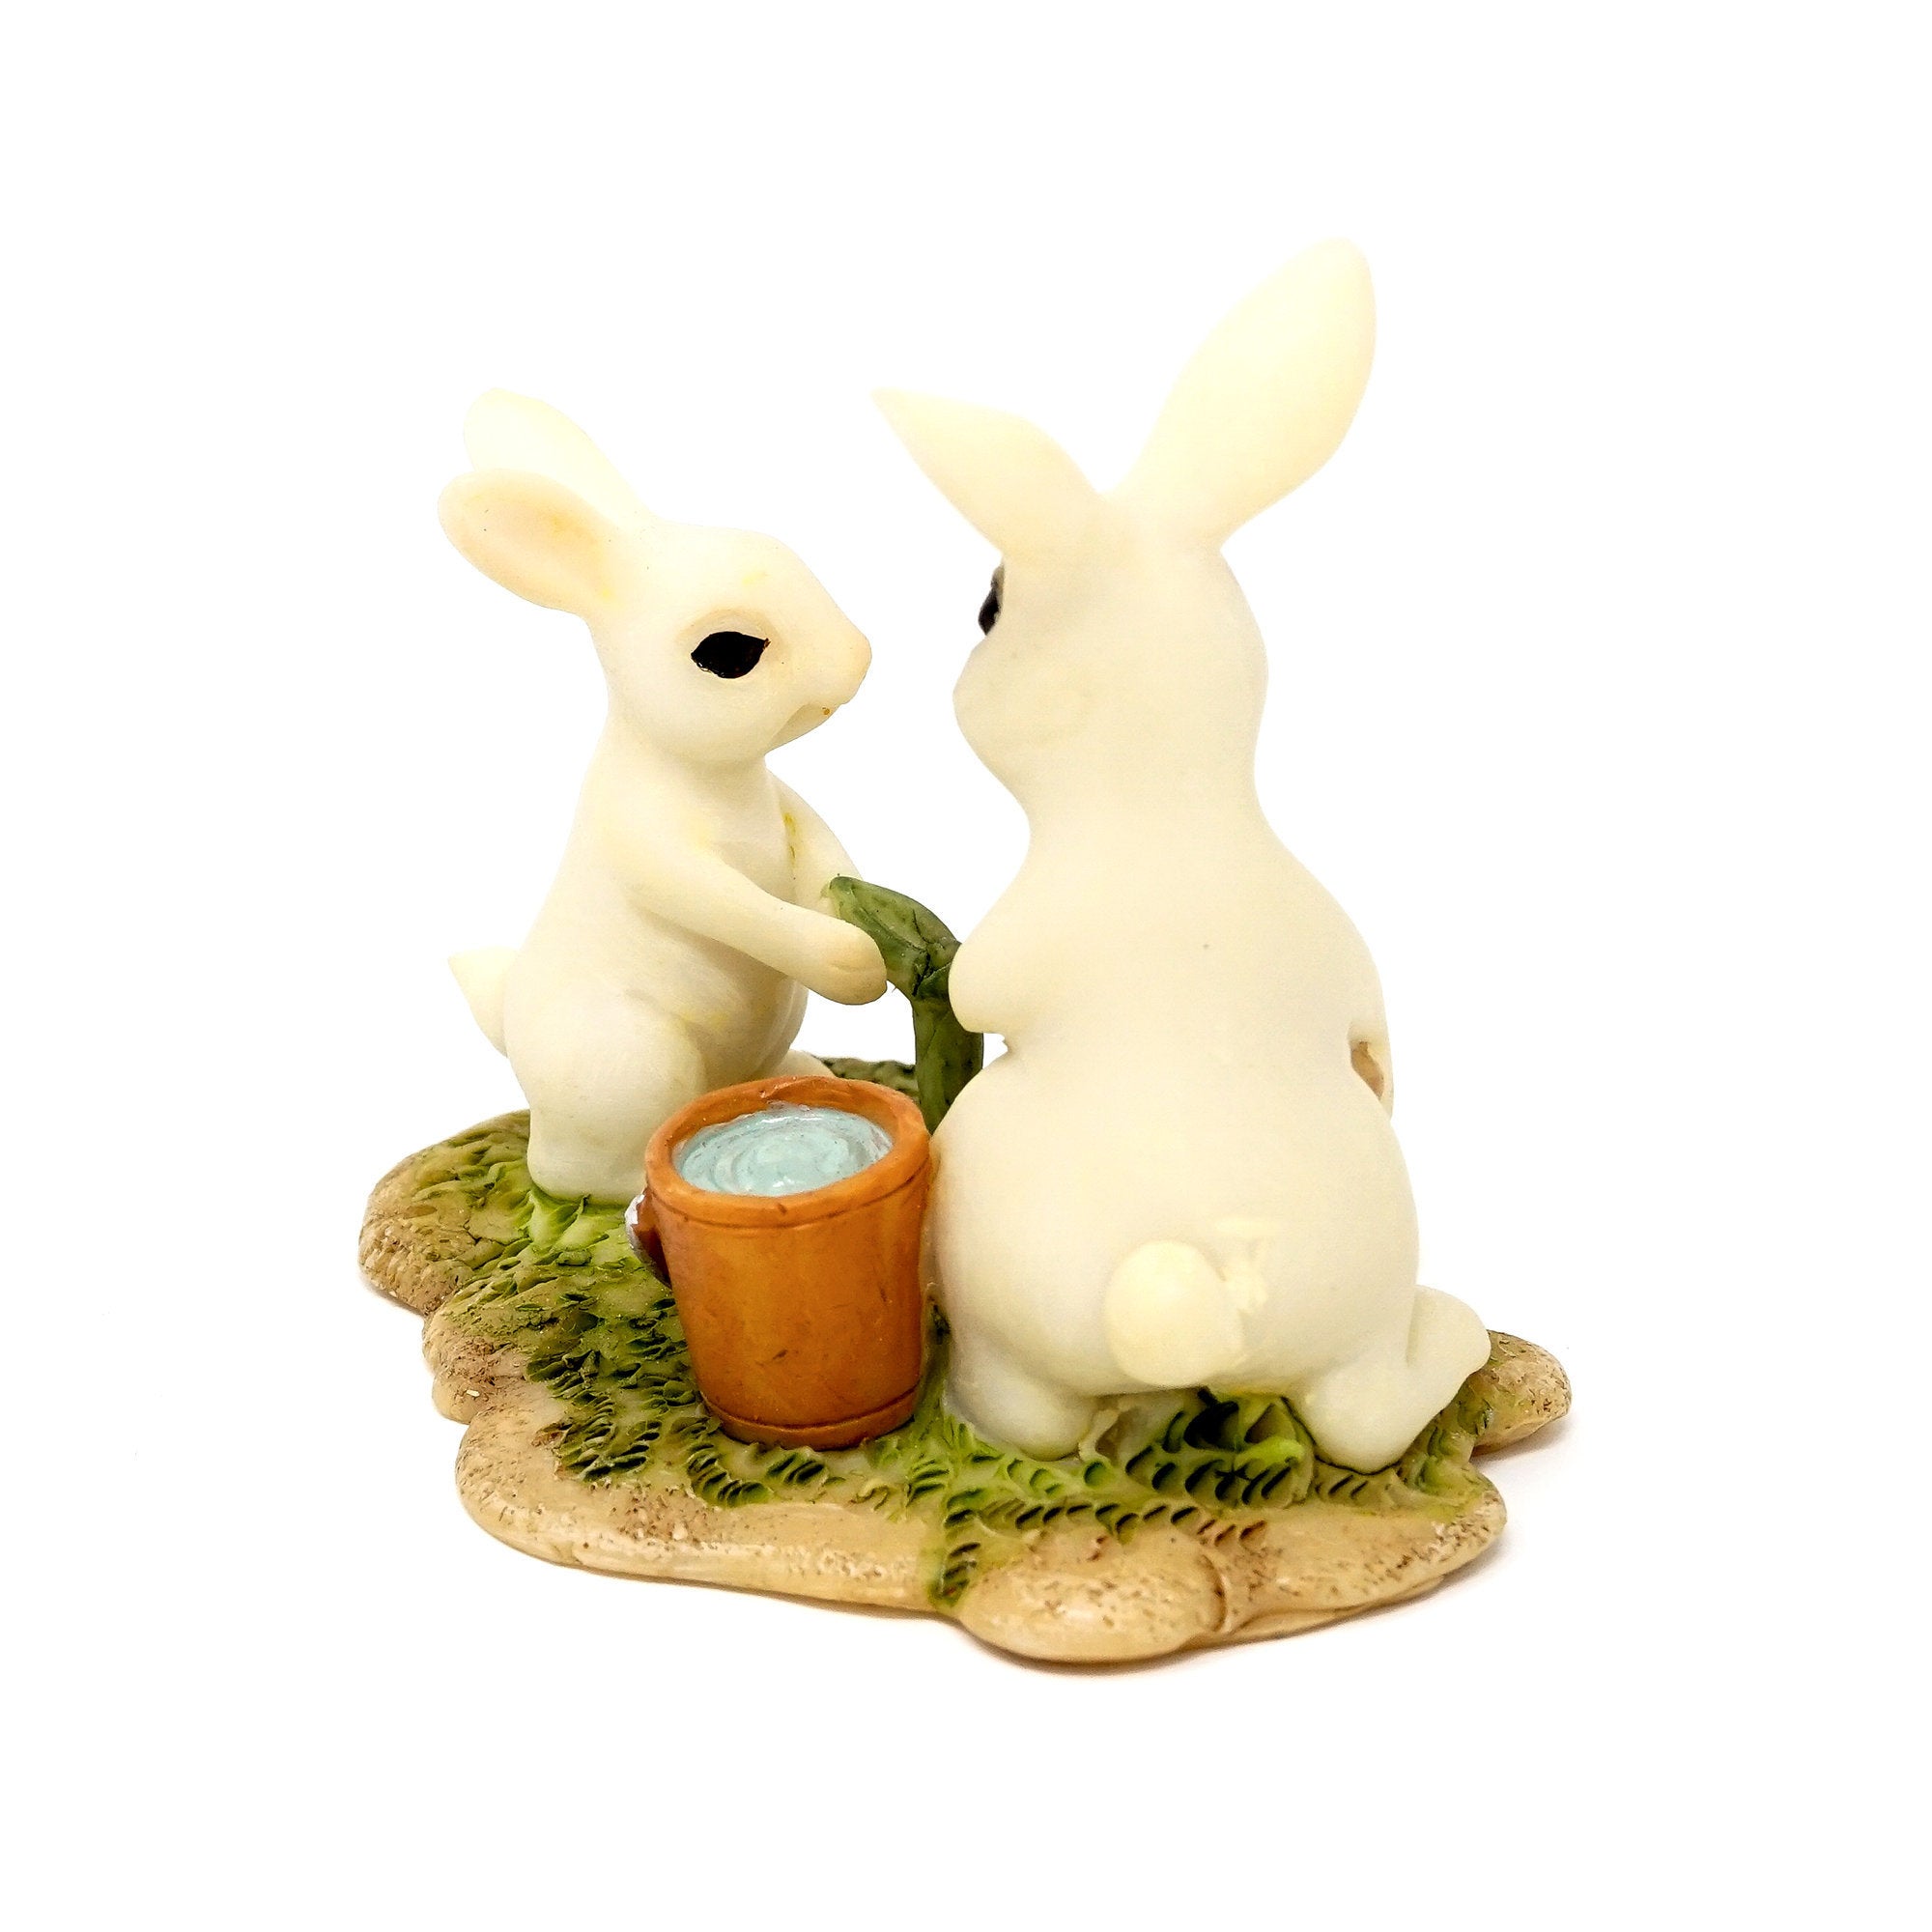 Bunny Gardener Planting Cutting with Little Bunny, Mini Bunny, Mini Rabbit, Fairy Garden Bunny, Fairy Garden Rabbit, Bunny Gardeners, Fairy Garden - image 3 of 4